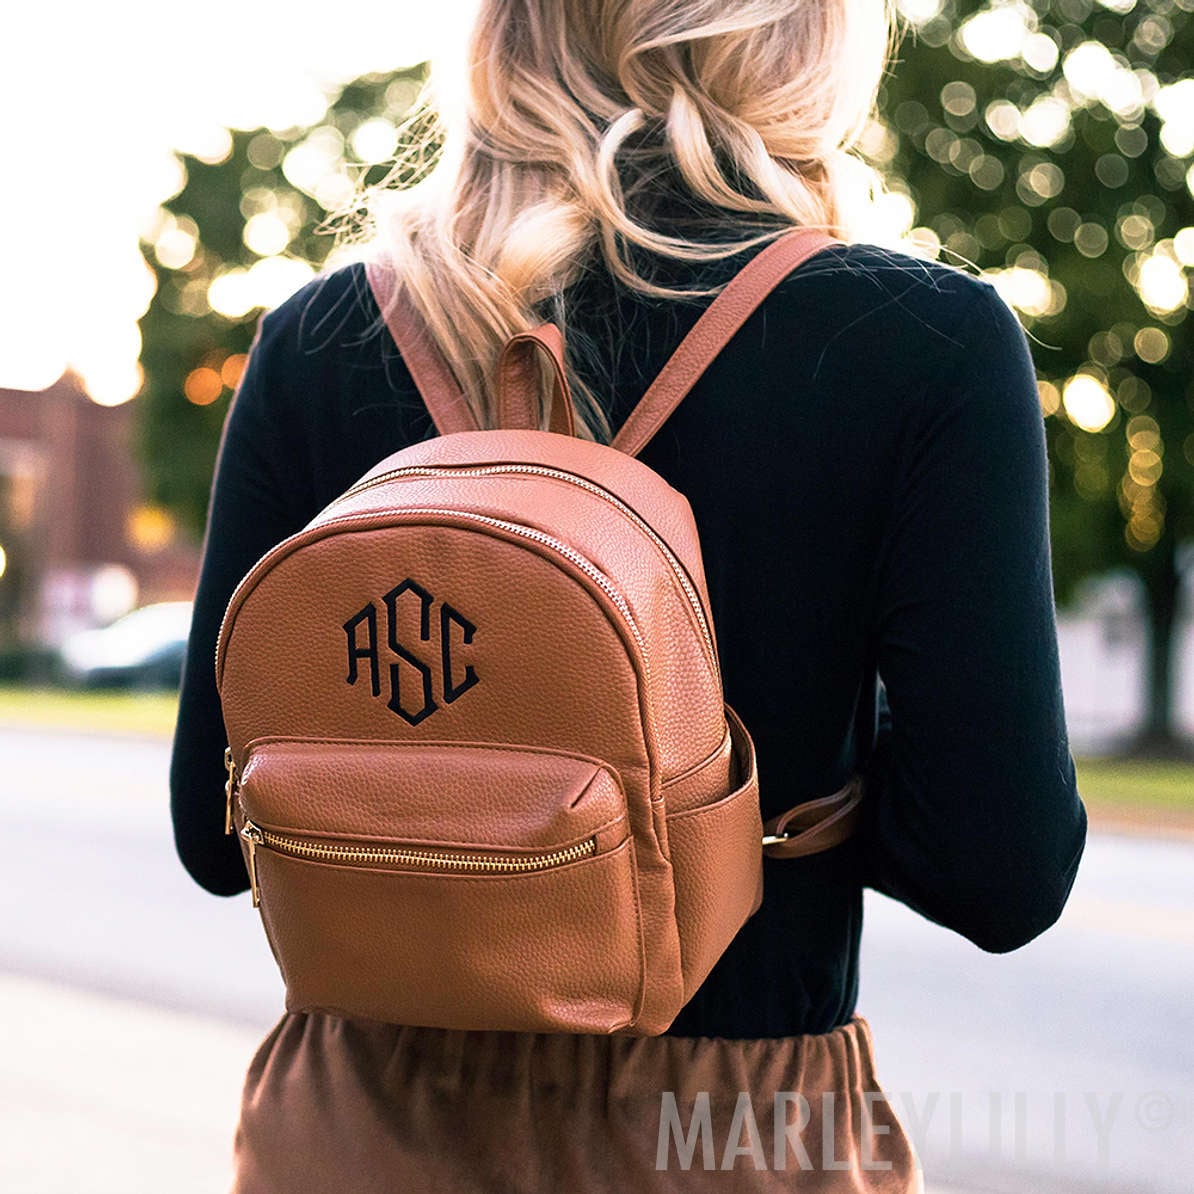 Marleylilly - Monogrammed Gifts - Purses are like friends.. you